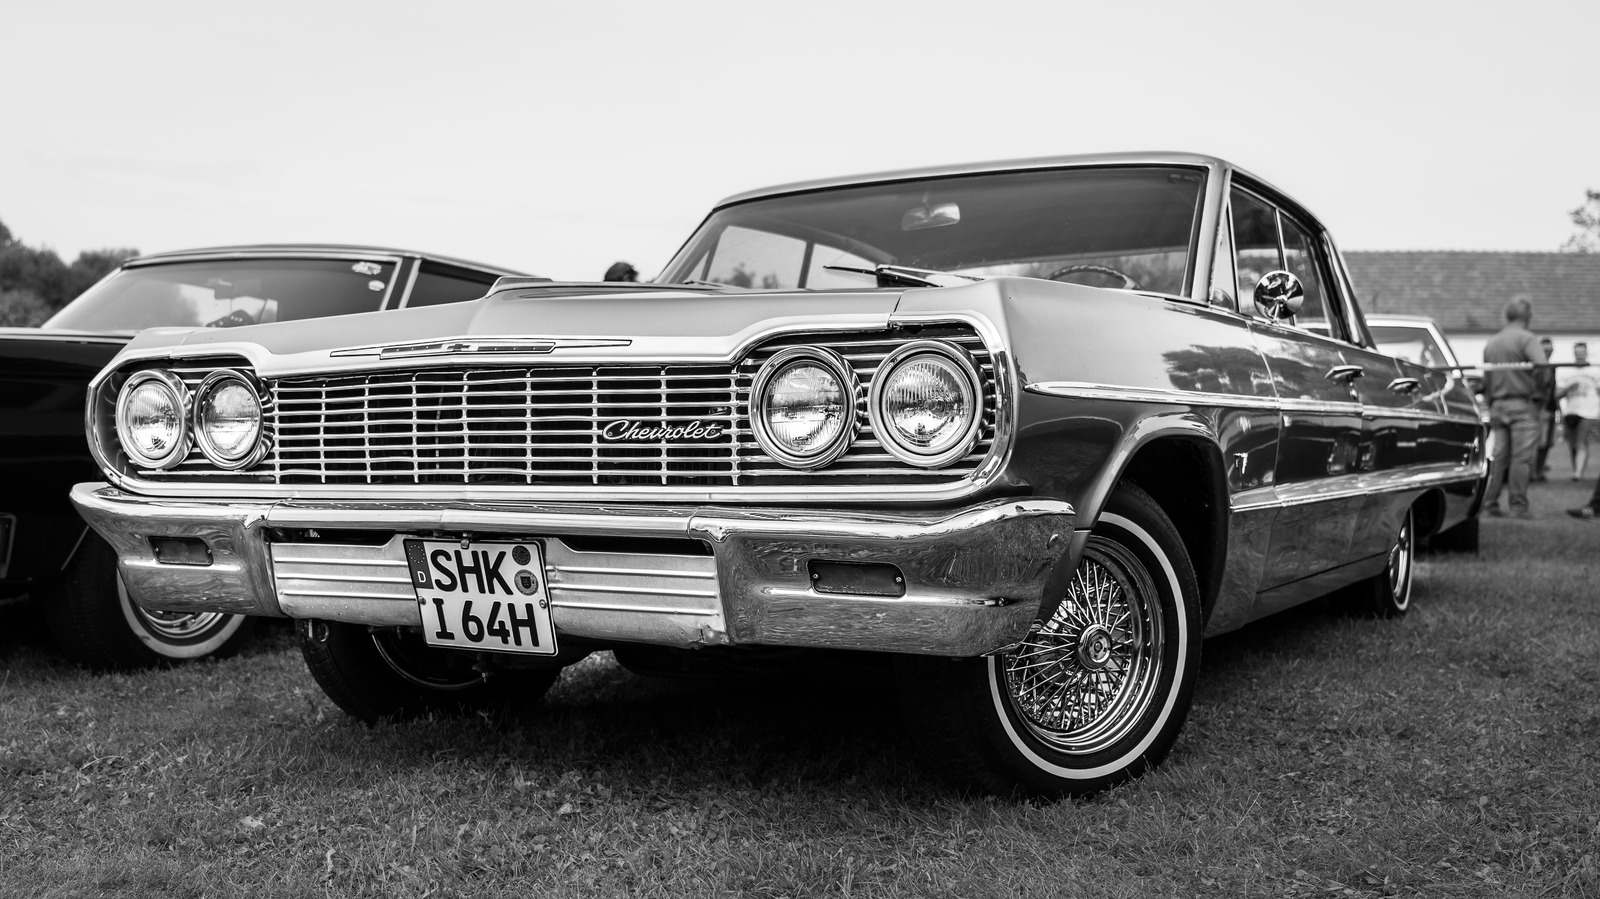 10 Reasons The 1964 Chevy Impala Is A Sought-After Collector's Car